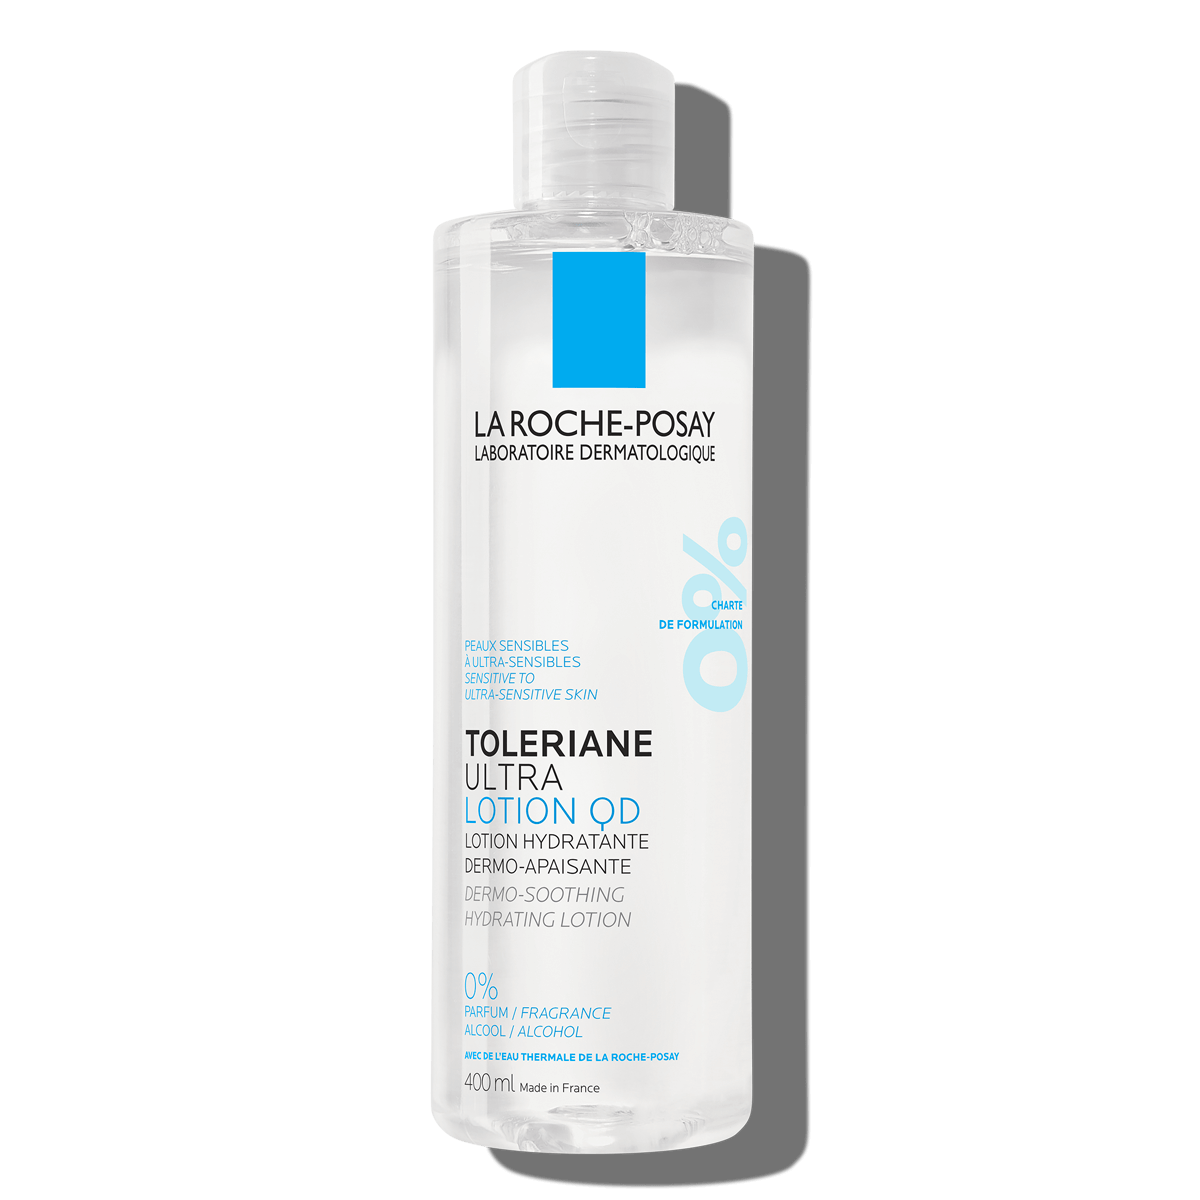 la-roche-posay-face-cleanser-3337875680240-toleriane-ultra-lotion-qd-400ml-front-strong-shadow